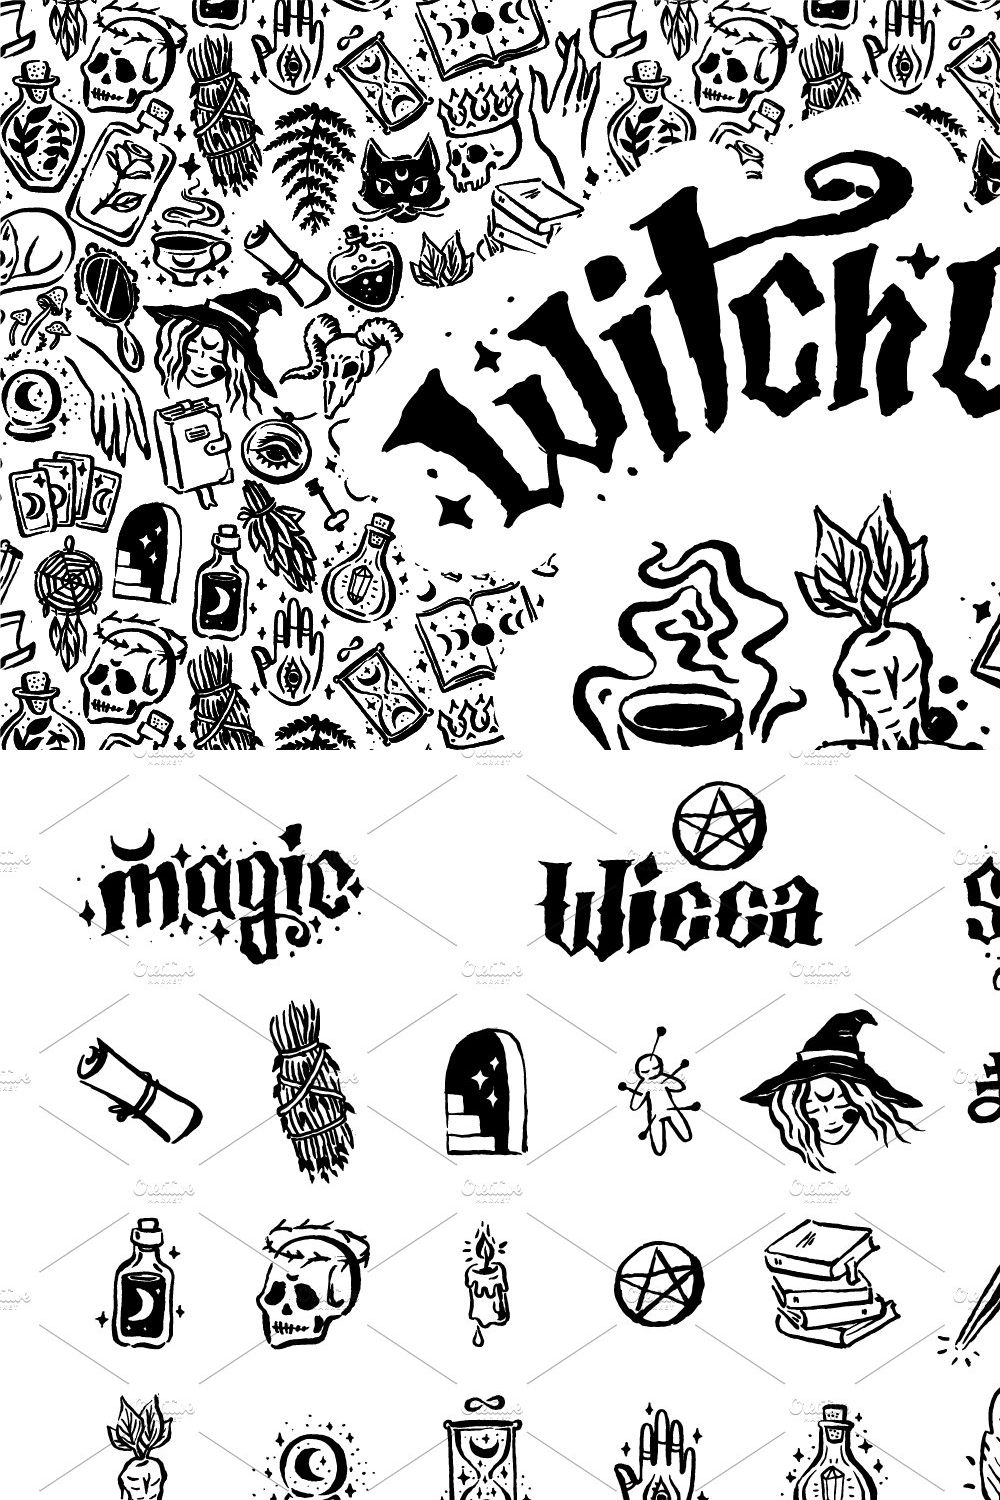 Witchcraft illustrations set pinterest preview image.